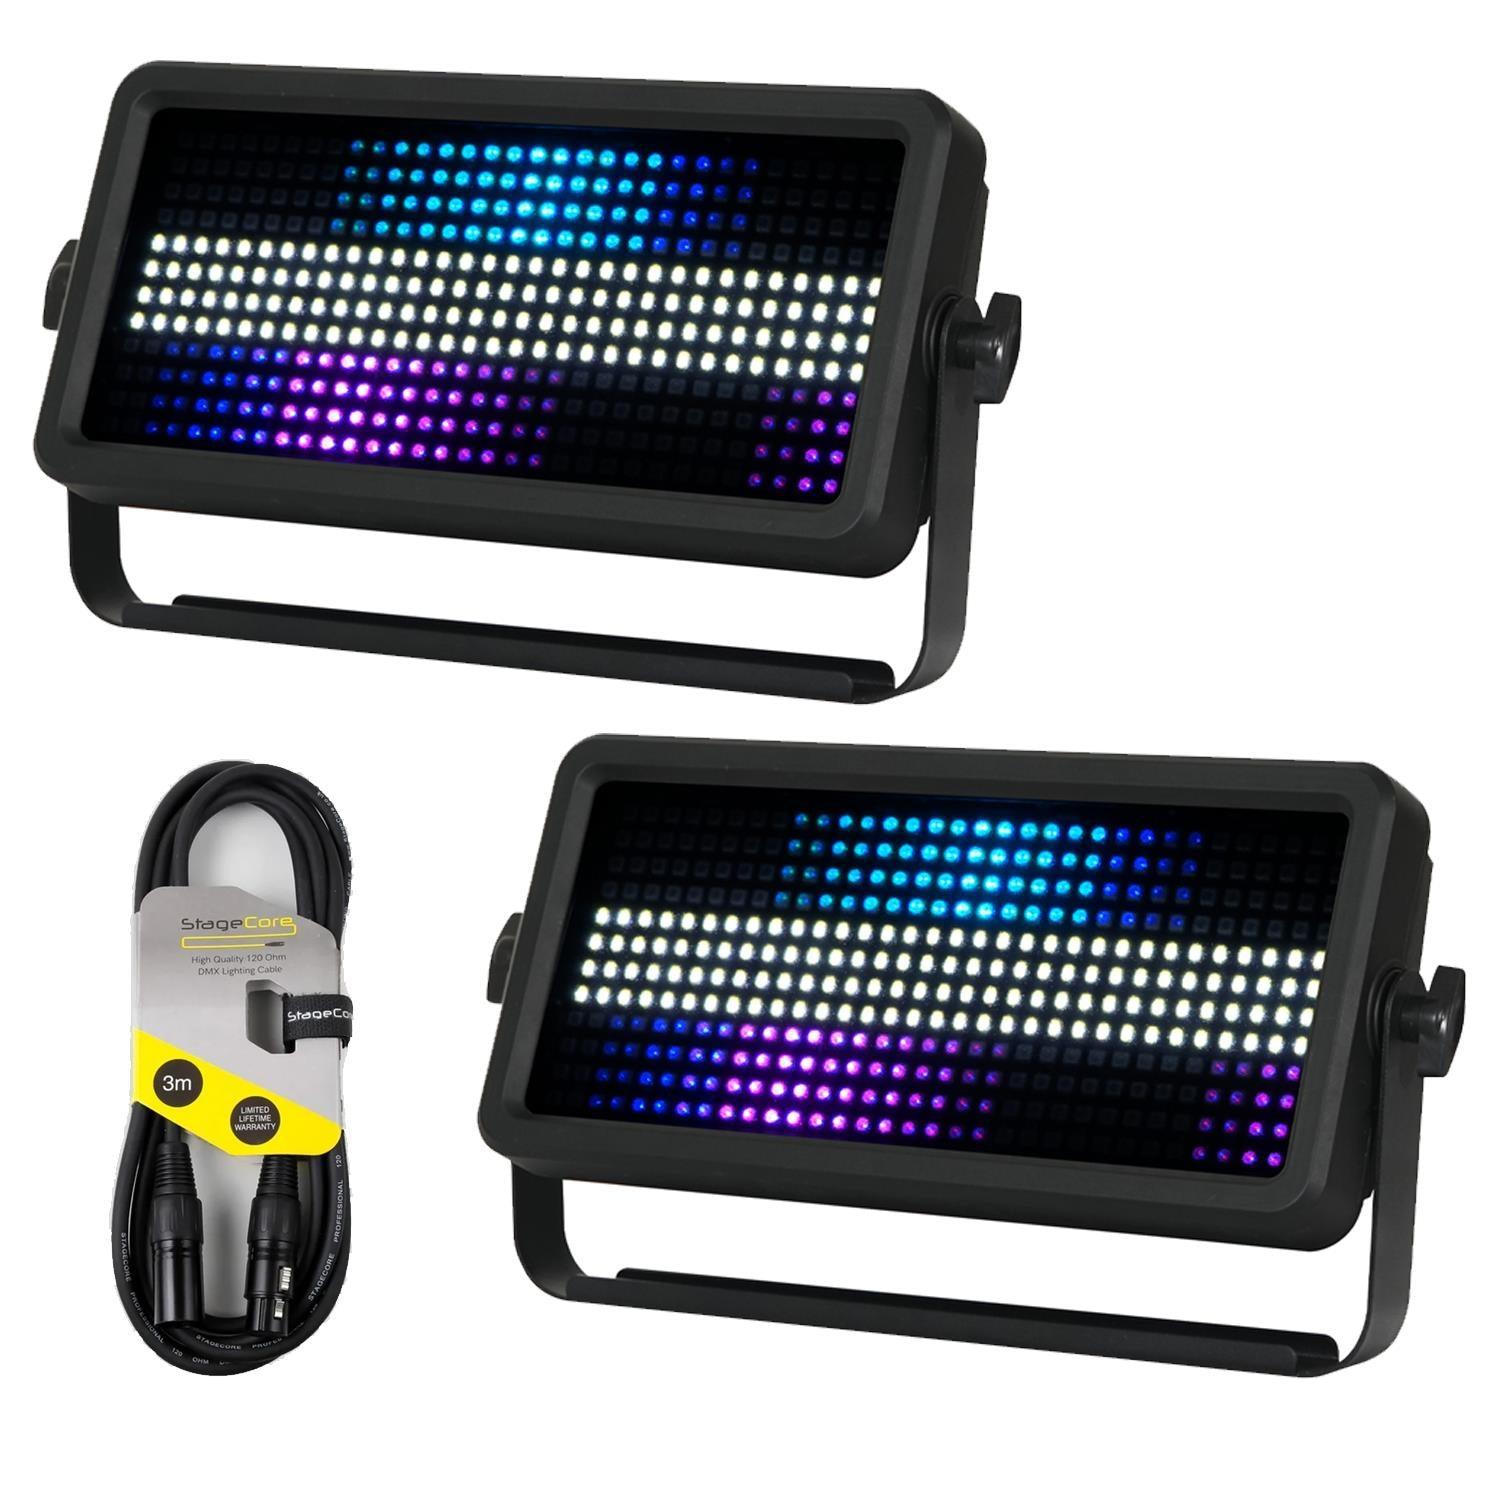 2 x Equinox Blitzer Impact 384 Strobe Effect Light with DMX Cable - DY Pro Audio